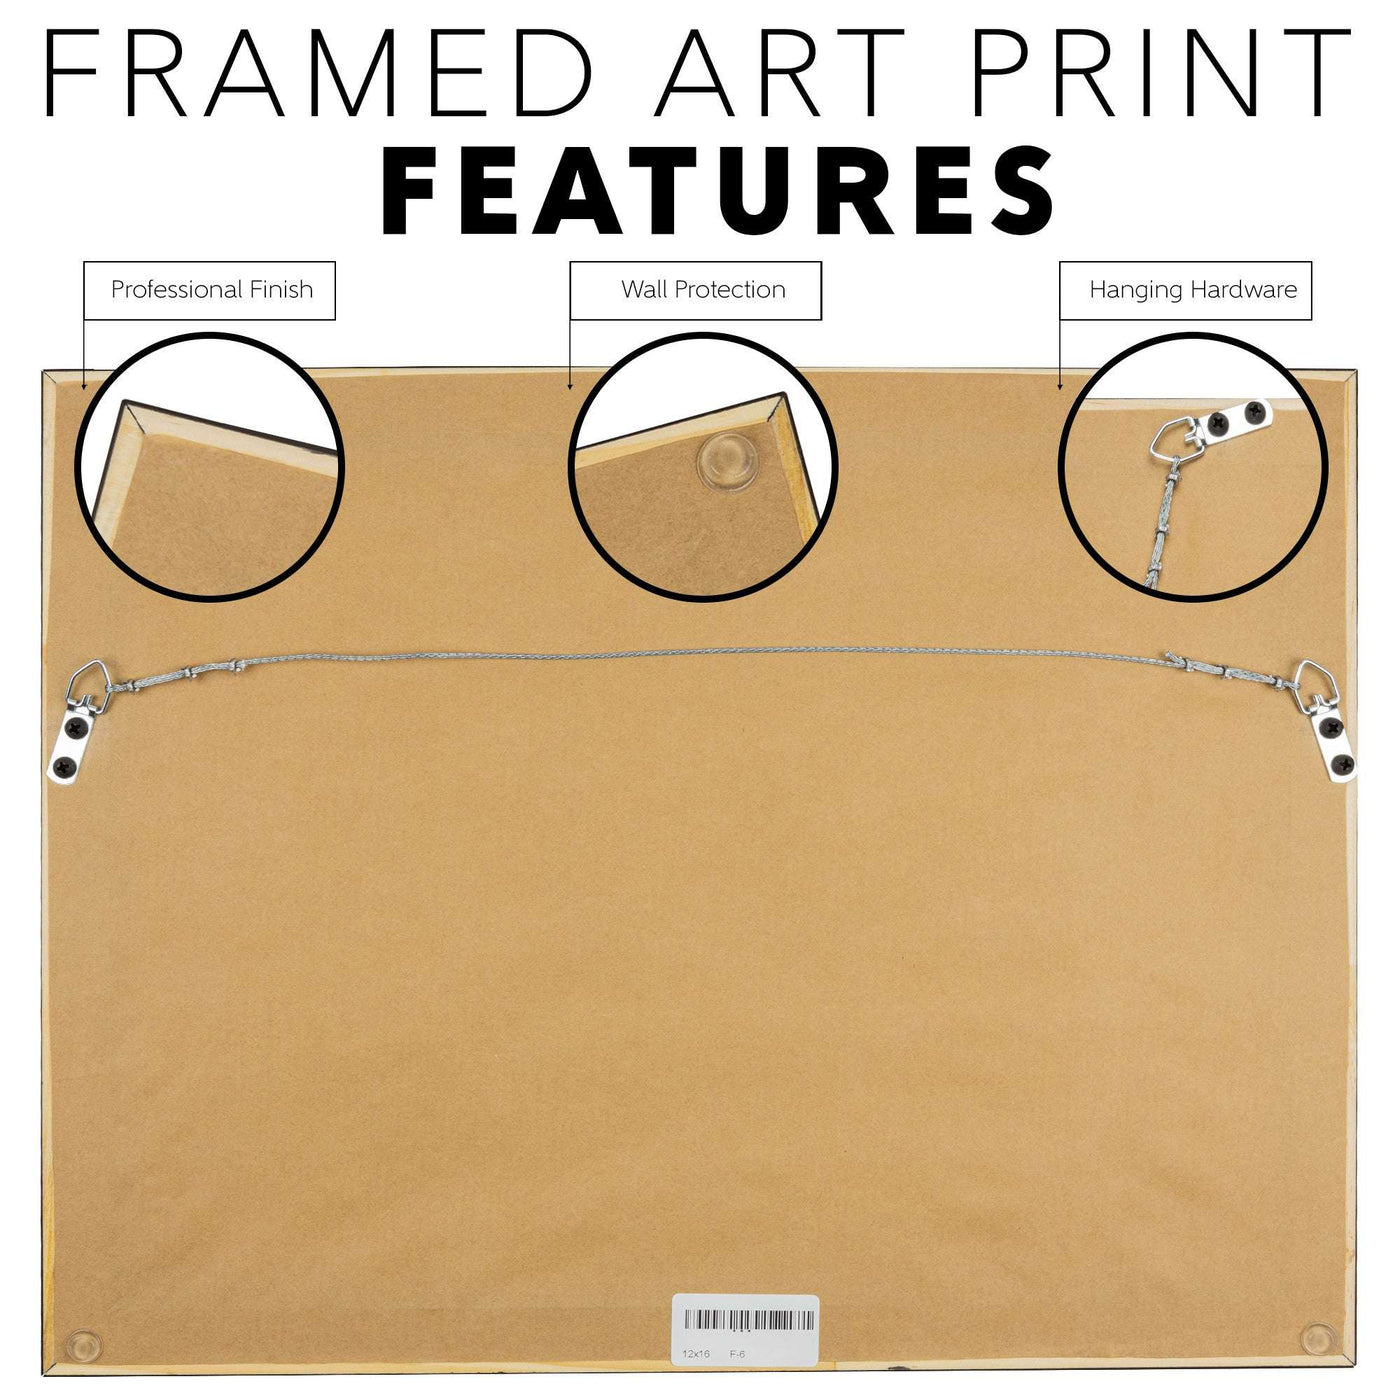 Back of a Framed Raccoon Art Print highlighting features: a professional finish, wall protection pads, and installed hanging hardware with close-up insets.